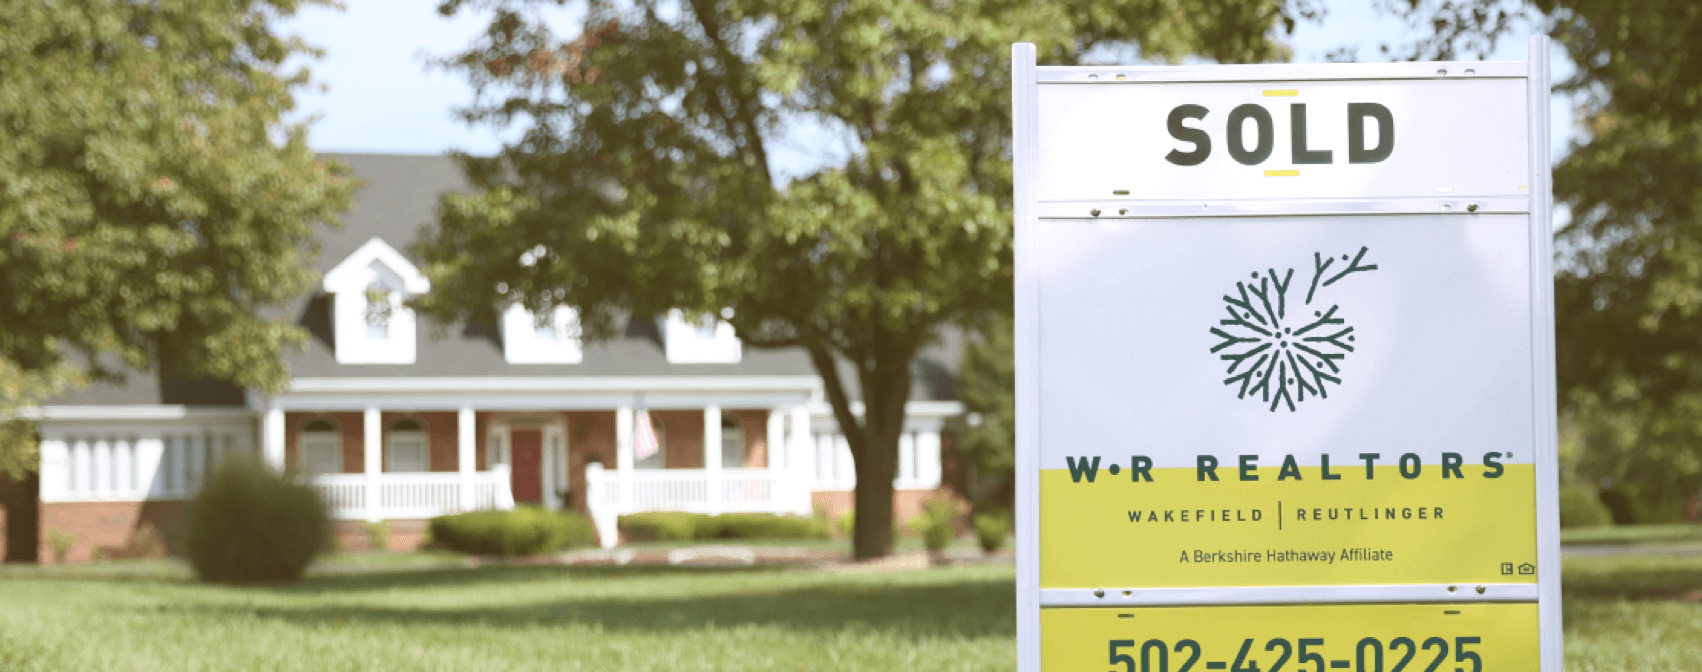 WR Realtors sold sign in front of house